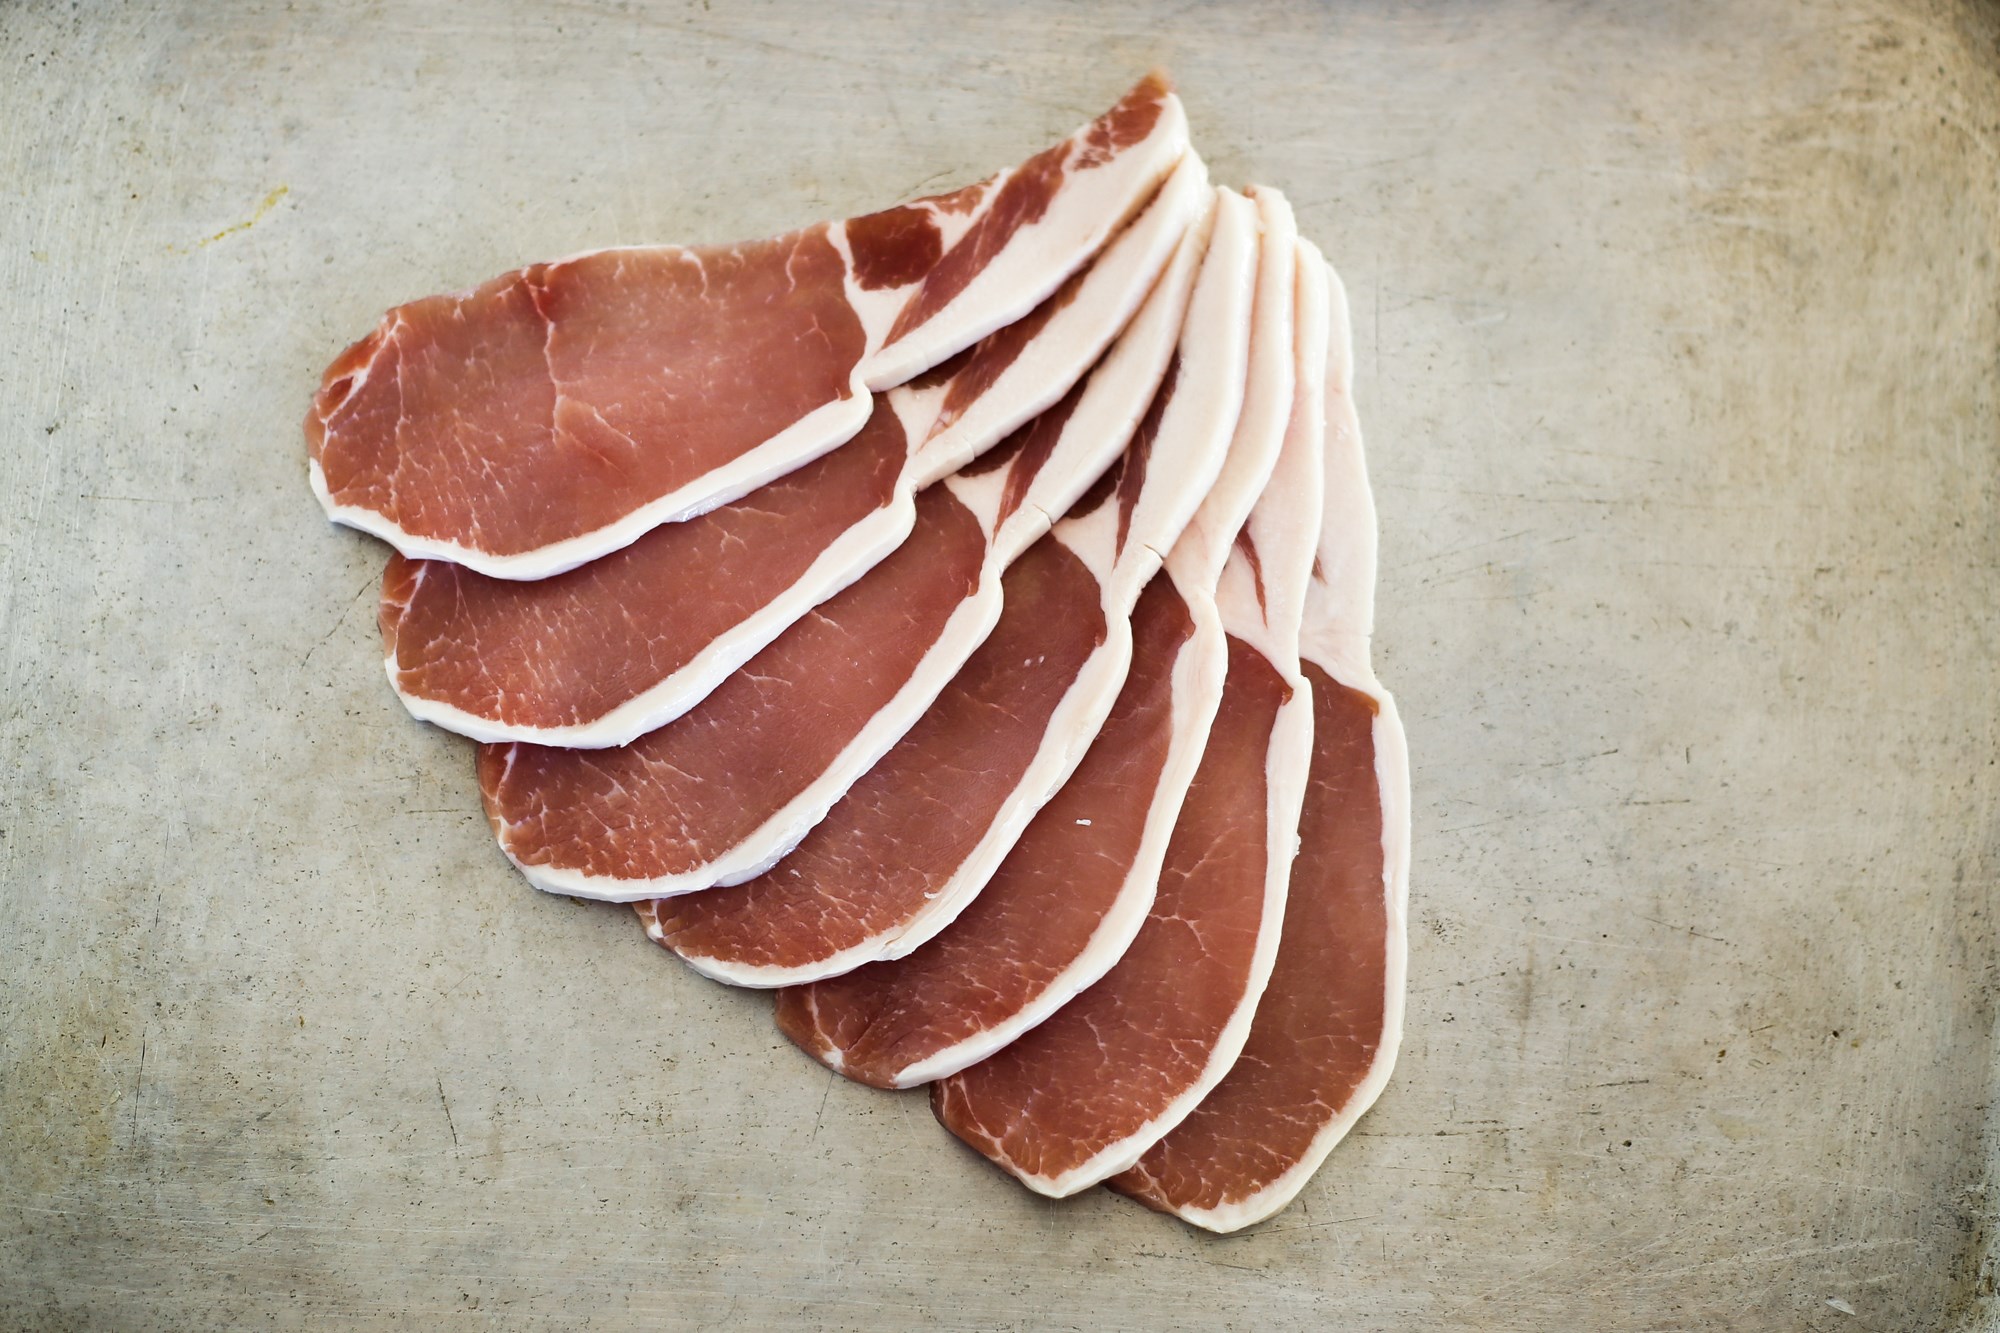 Dry cured back bacon slices (300g)